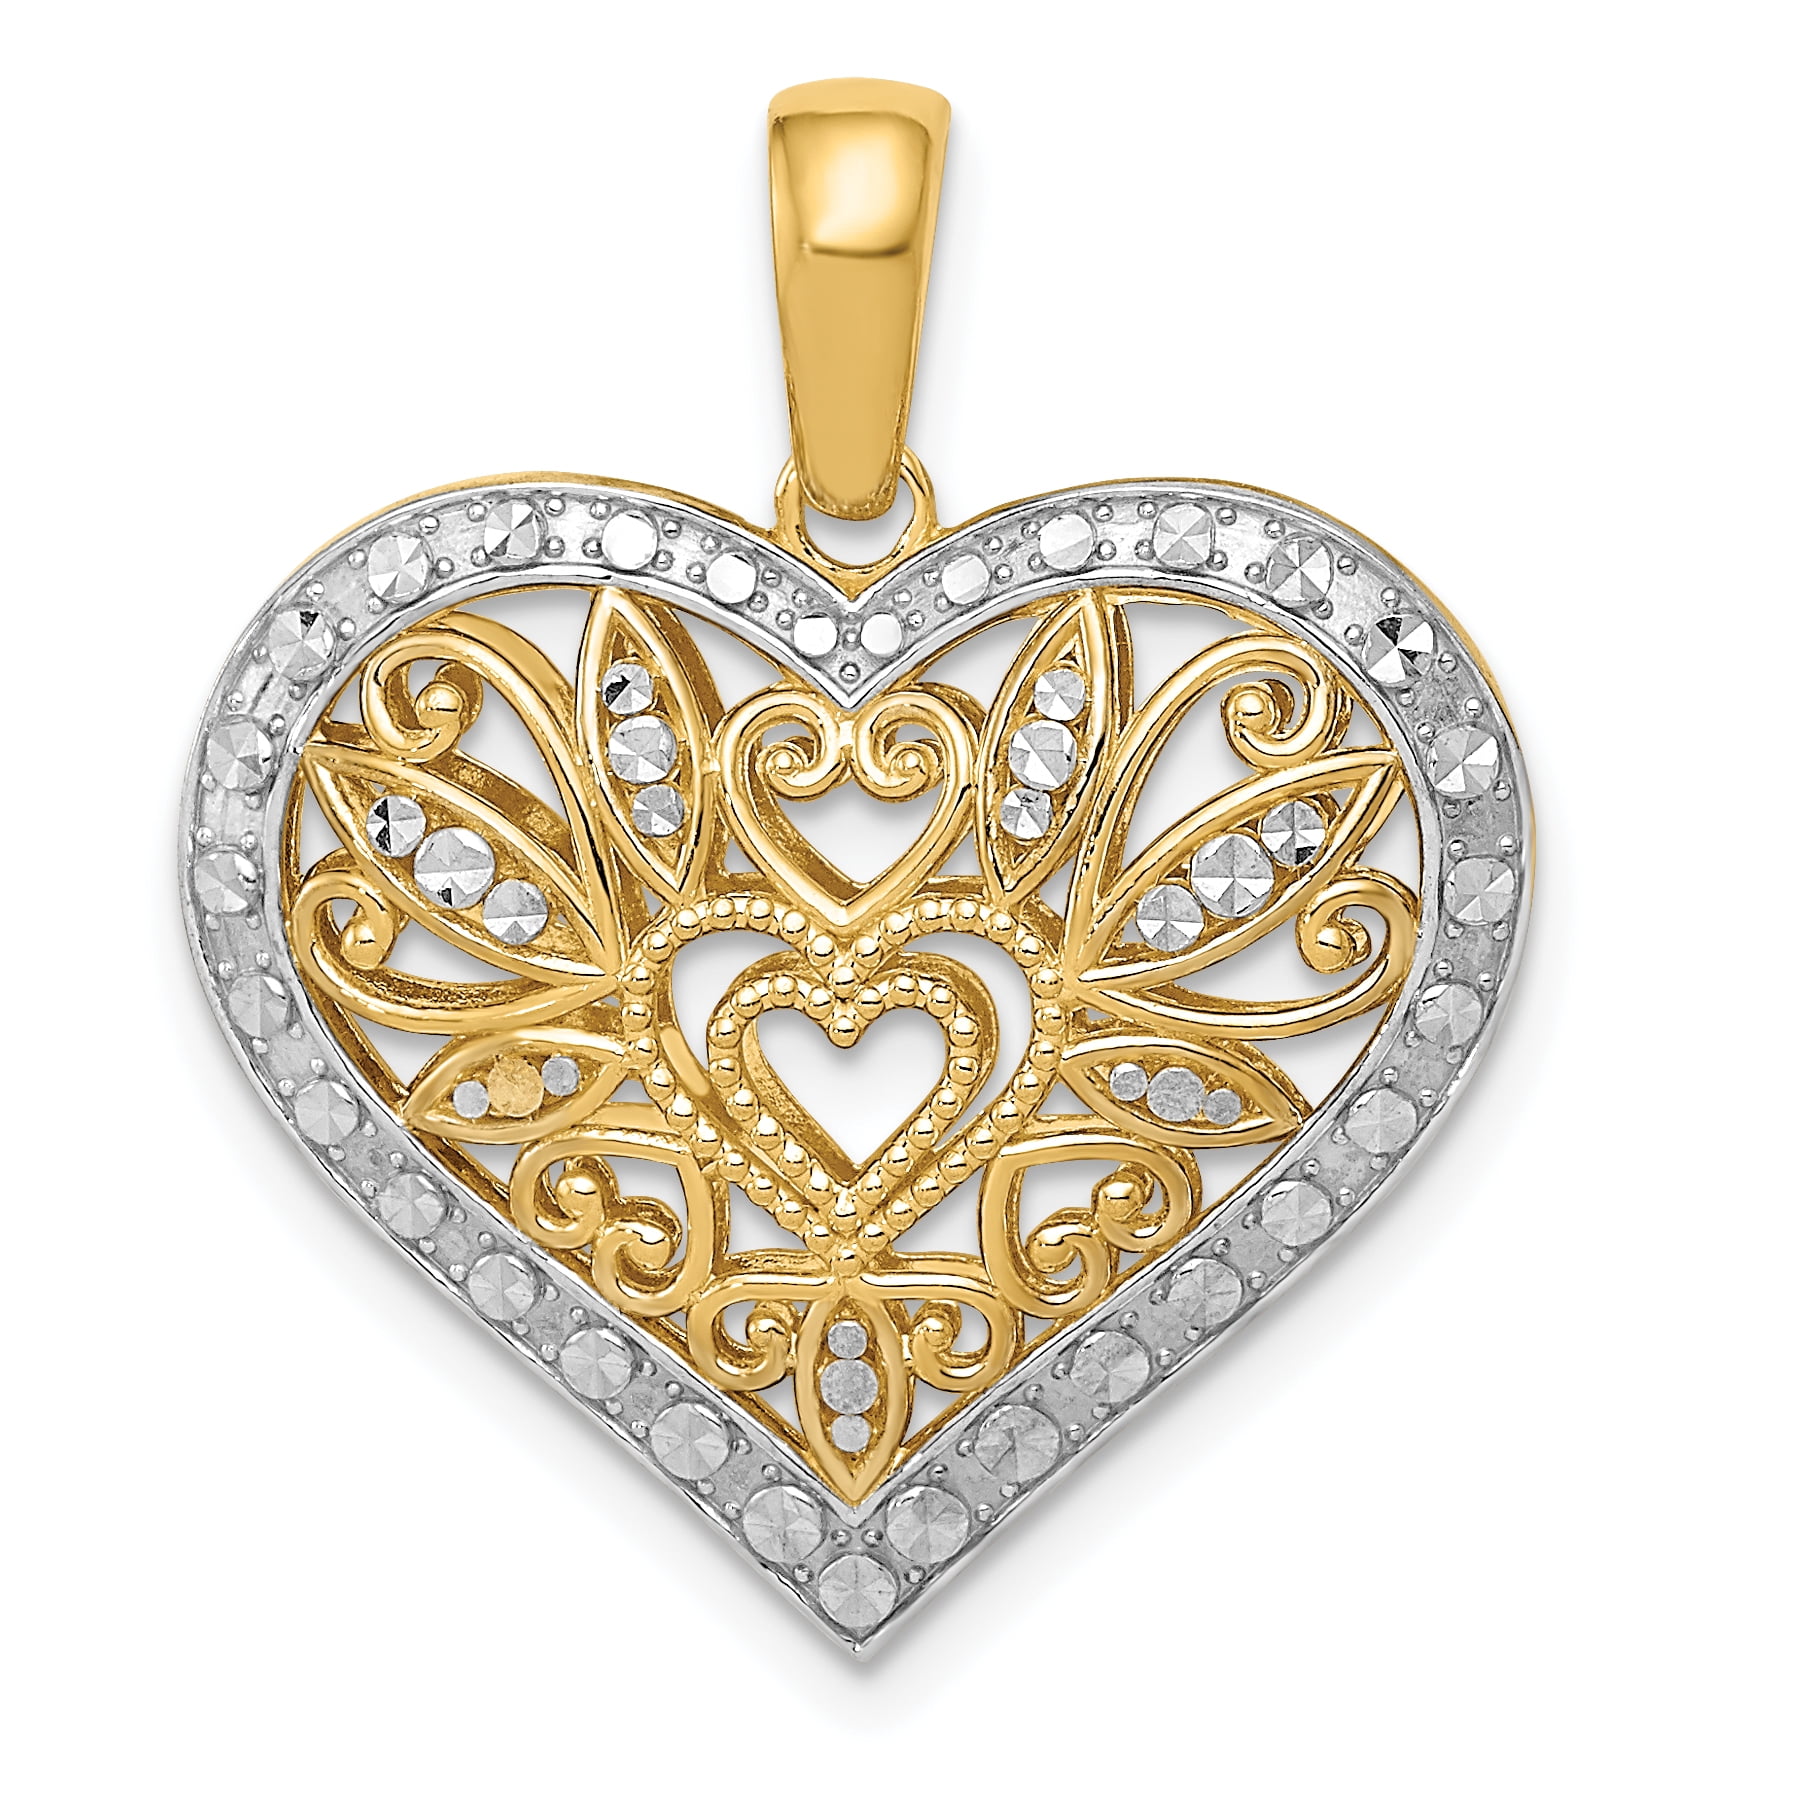 14k Gold Filigree Heart pendant with a solid high polish center Heart